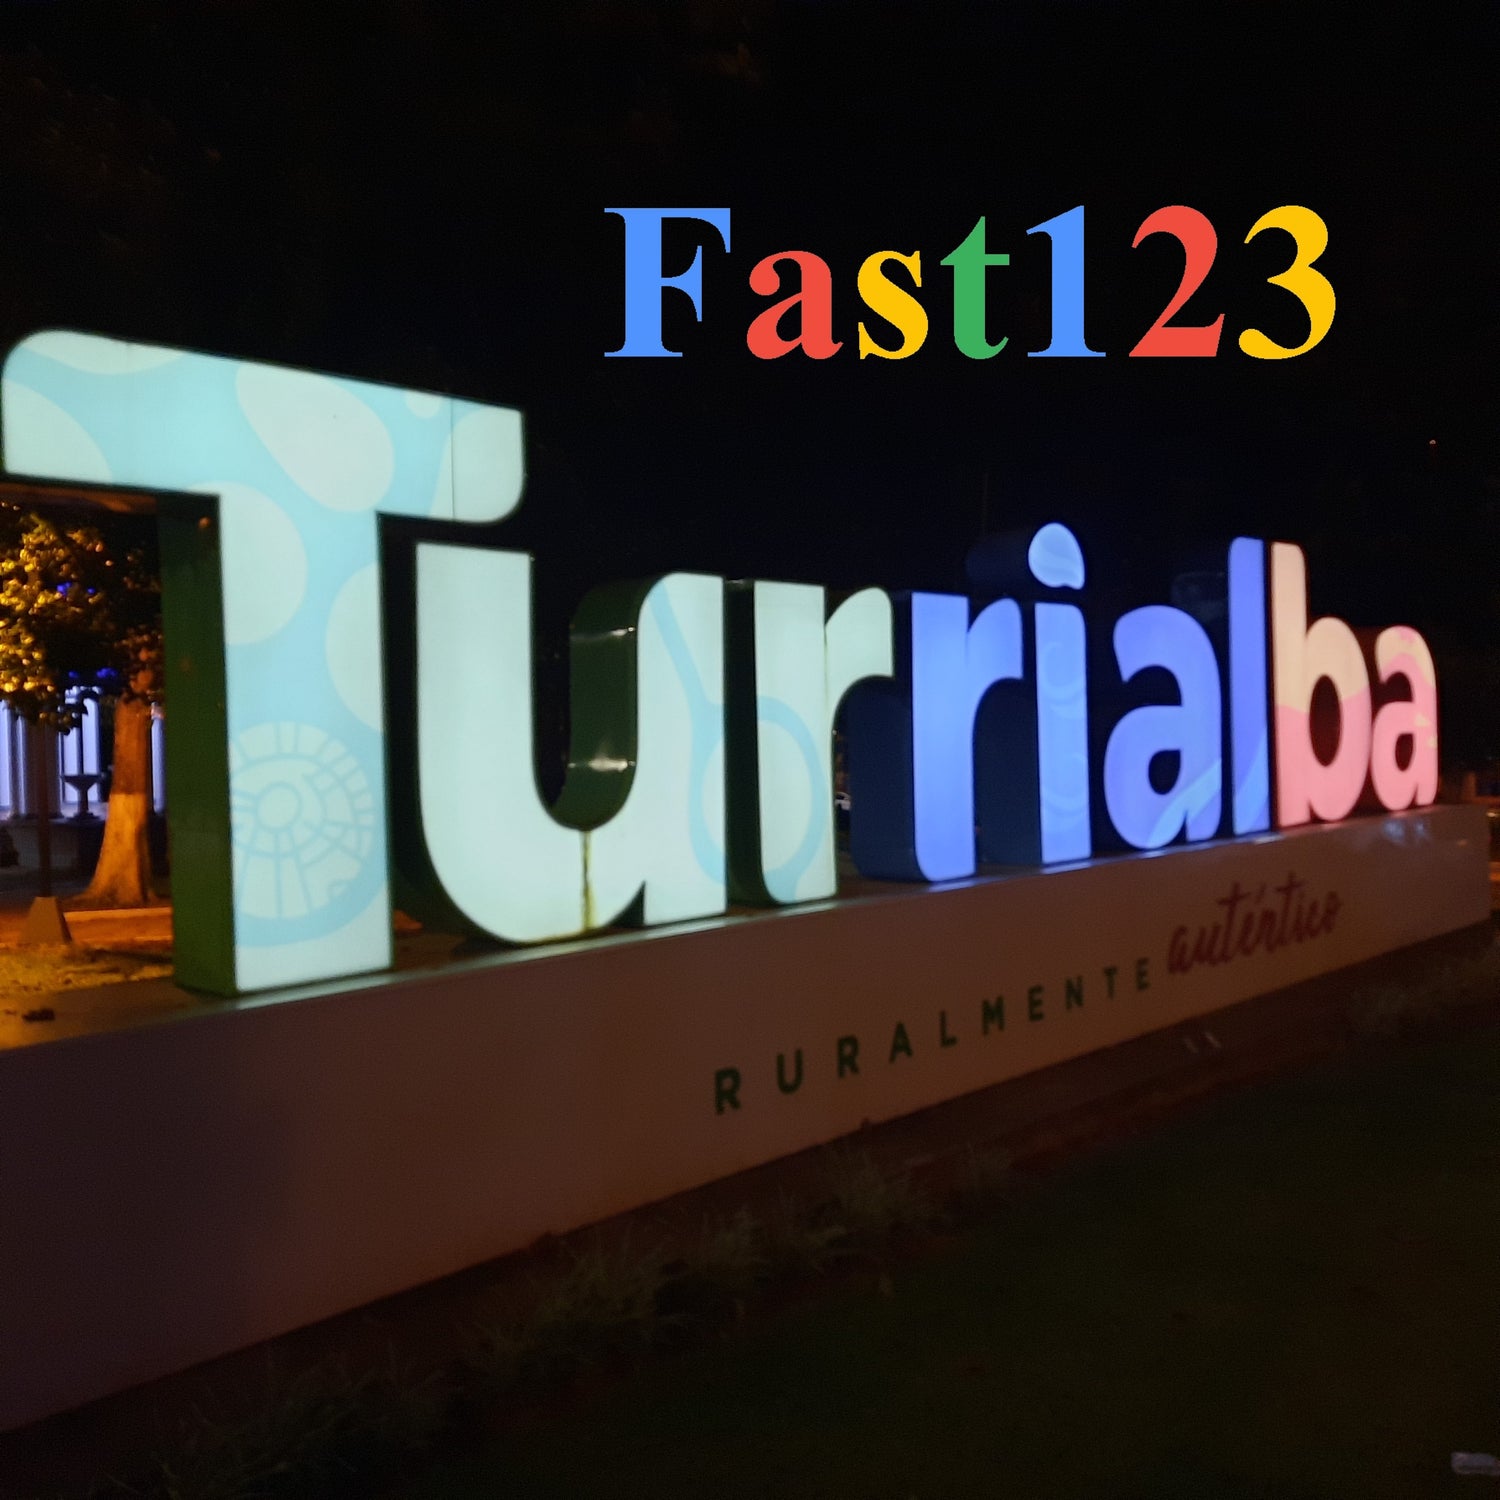 Find out more about Turrialba